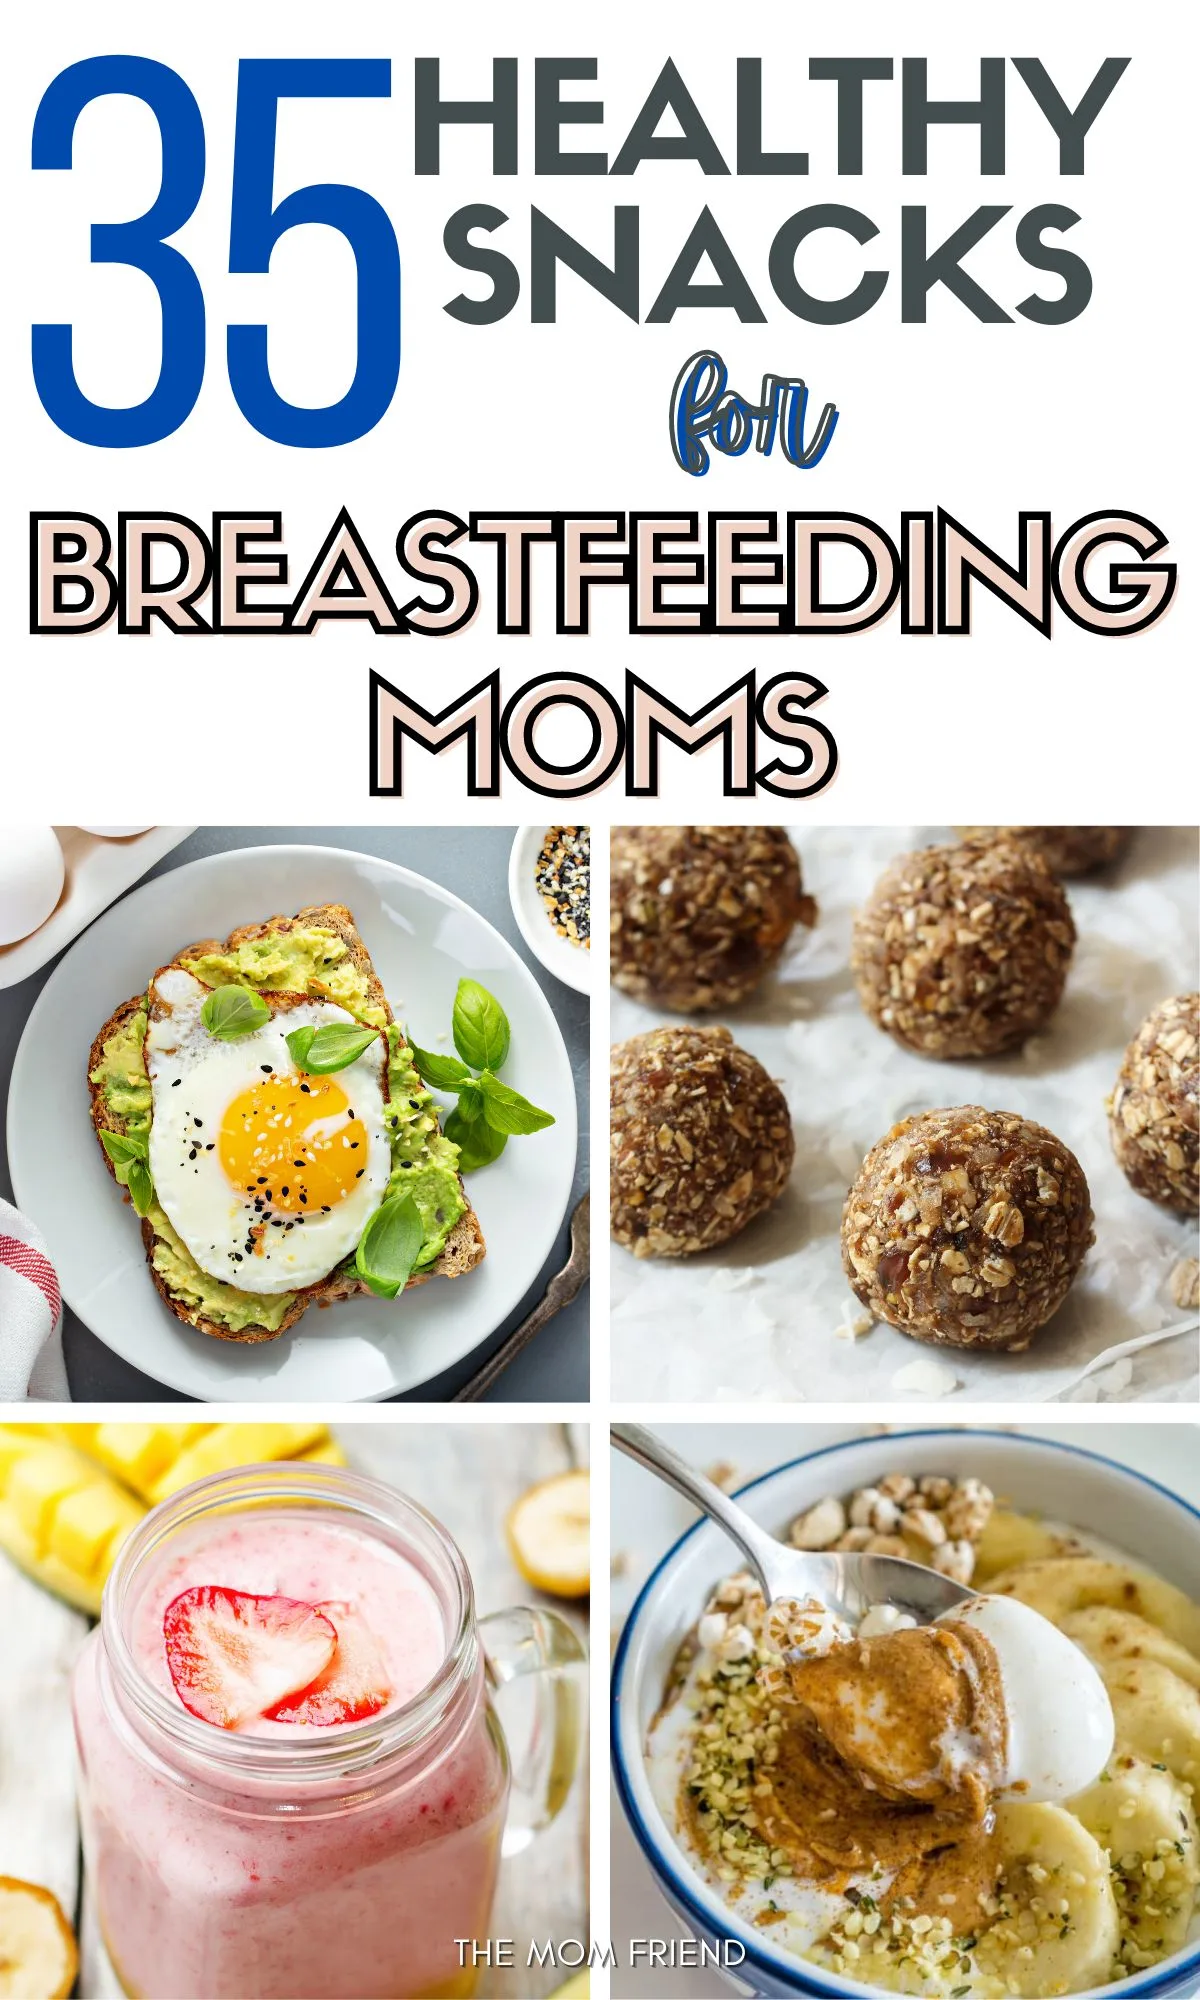 Picture with text: 35 Healthy Snacks for Breastfeeding Moms